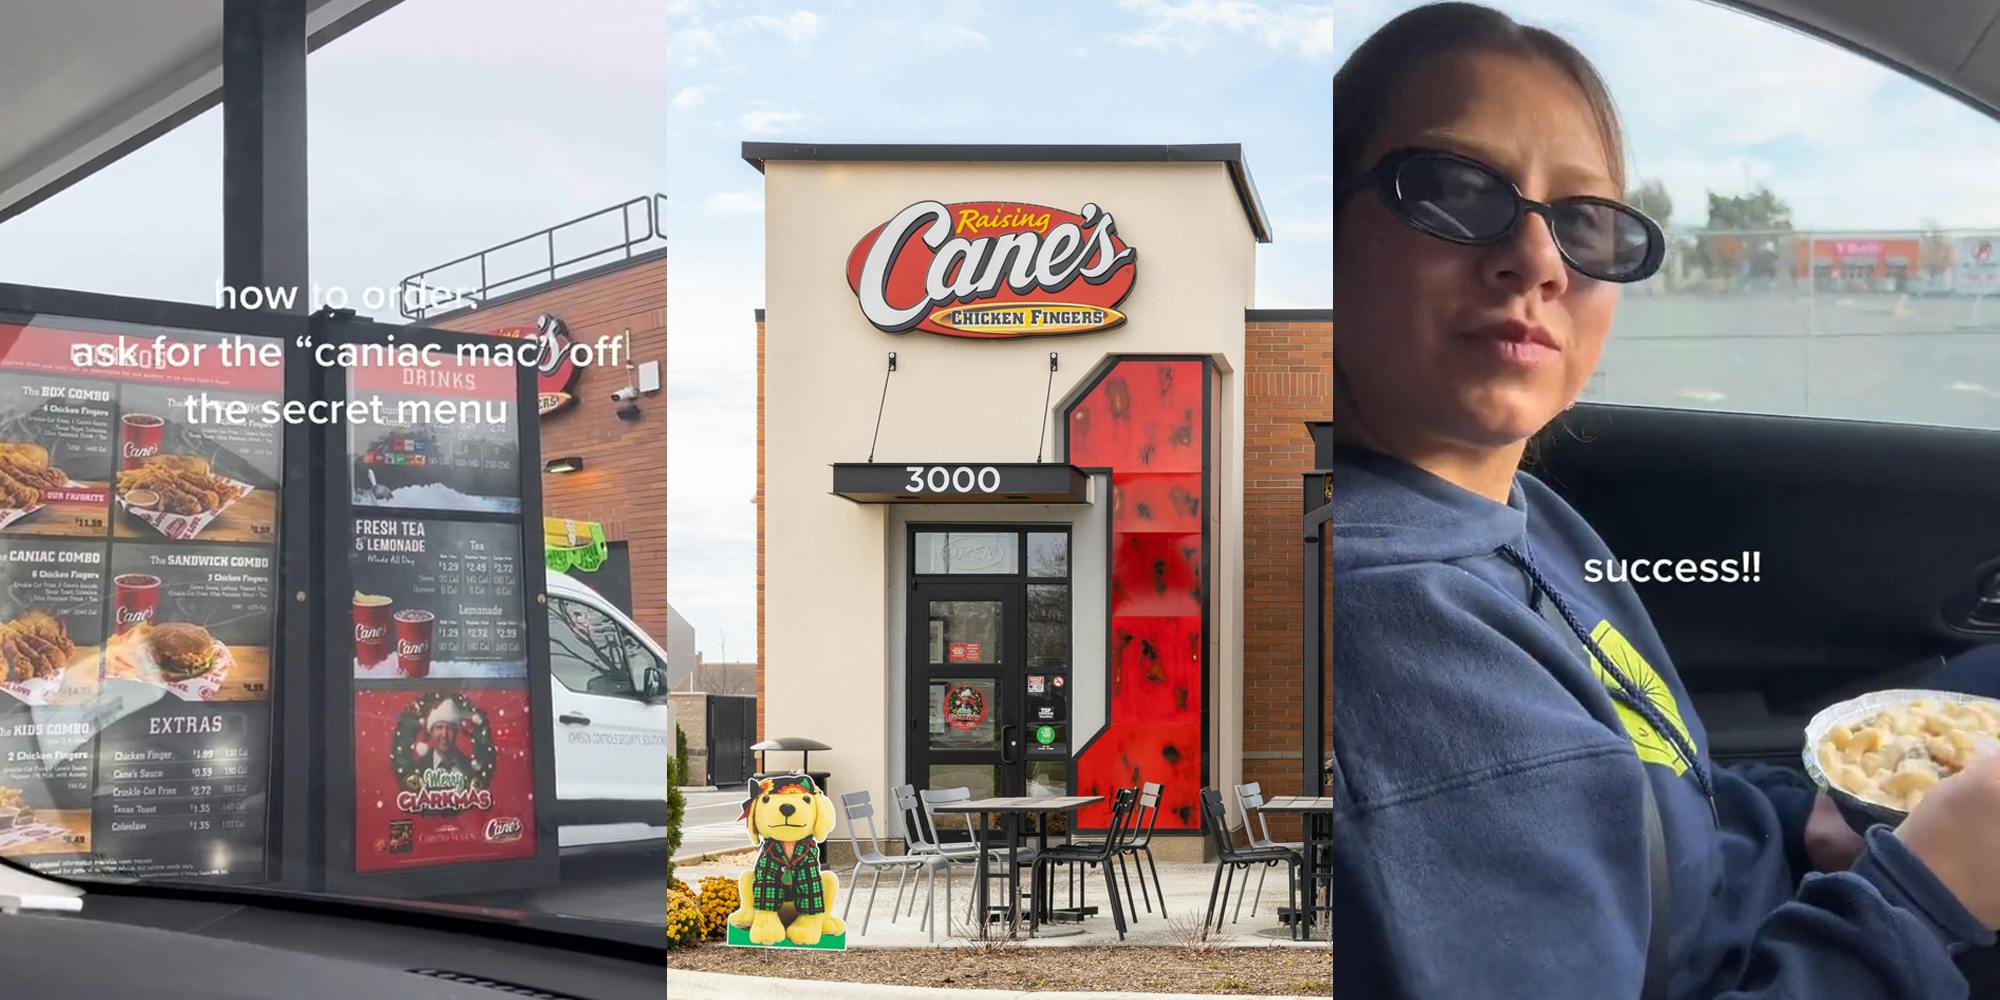 Canes drive thru menu with caption "how to order ask for the "caniac mac" off the secret menu" (l) Cane's sign on building (c) woman eating mac and cheese in car with caption "success!!" (r)